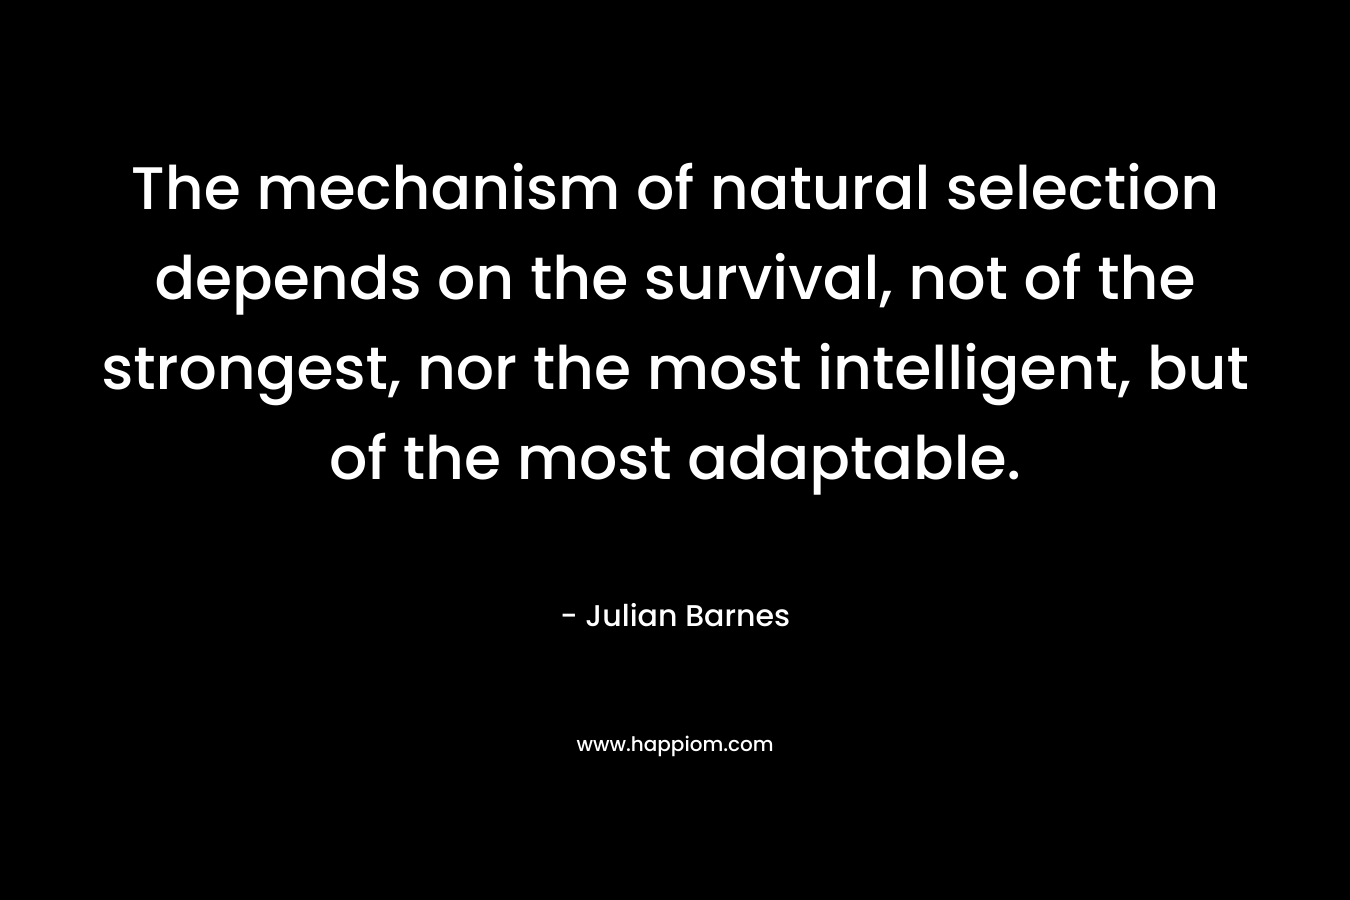 The mechanism of natural selection depends on the survival, not of the strongest, nor the most intelligent, but of the most adaptable.